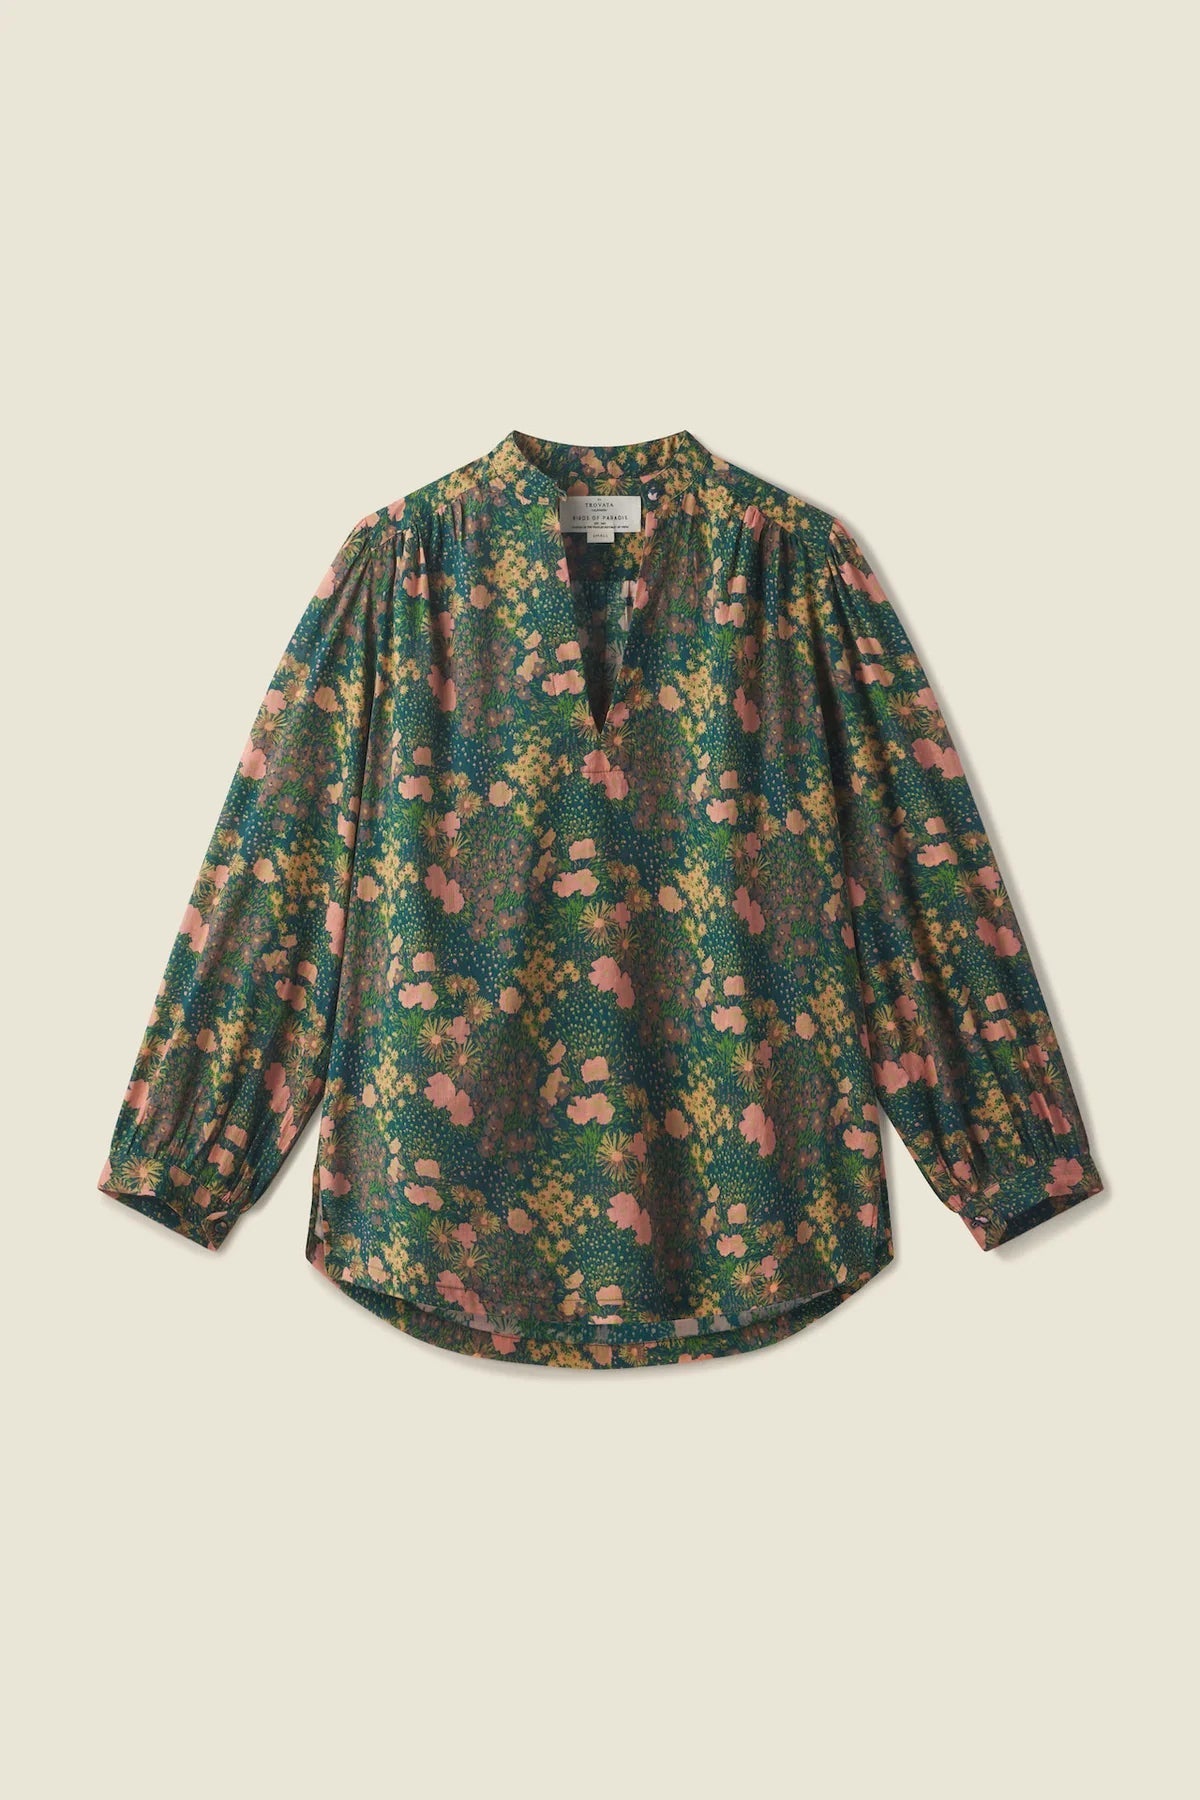 Trovata Birds of Paradis Bailey blouse in woodbine cluster